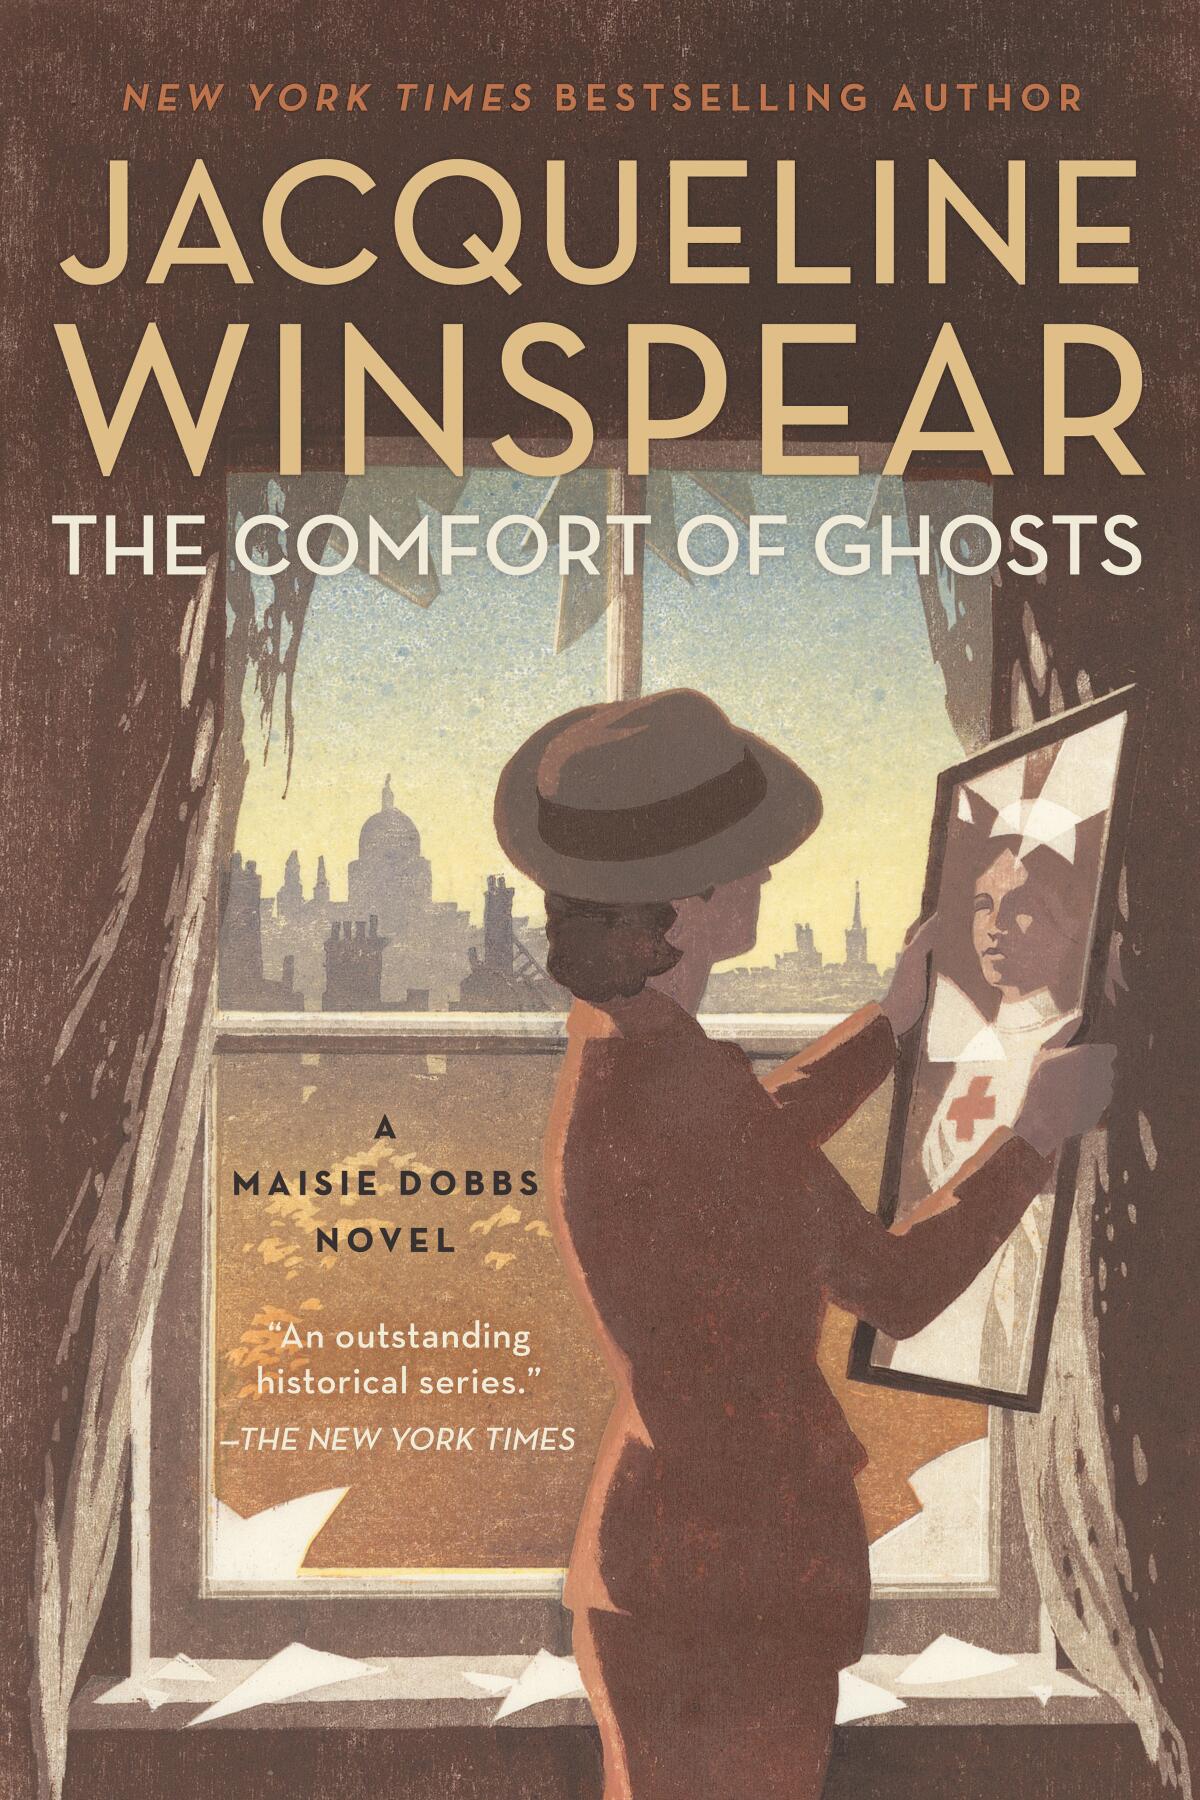 "The Comfort of Ghosts" by Jacqueline Winspear